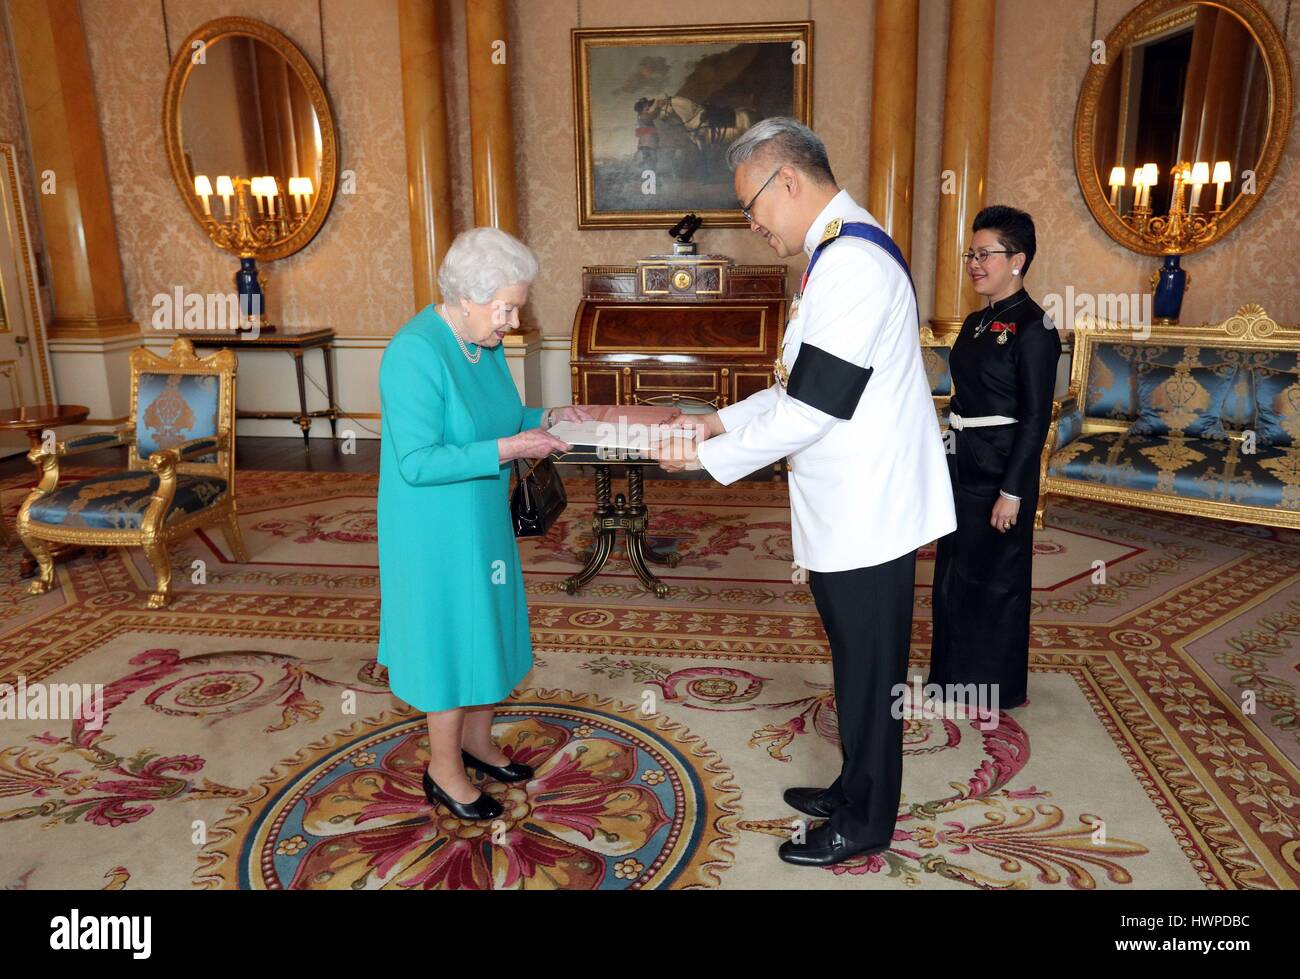 Queen Elizabeth II (left) is presented with Letters of Credence by the  Ambassador from the Kingdom of Thailand, Mr. Pisanu Suvanajata (centre),  accompanied by his wife, Mrs. Thipayasuda Suvanajata (right), during a